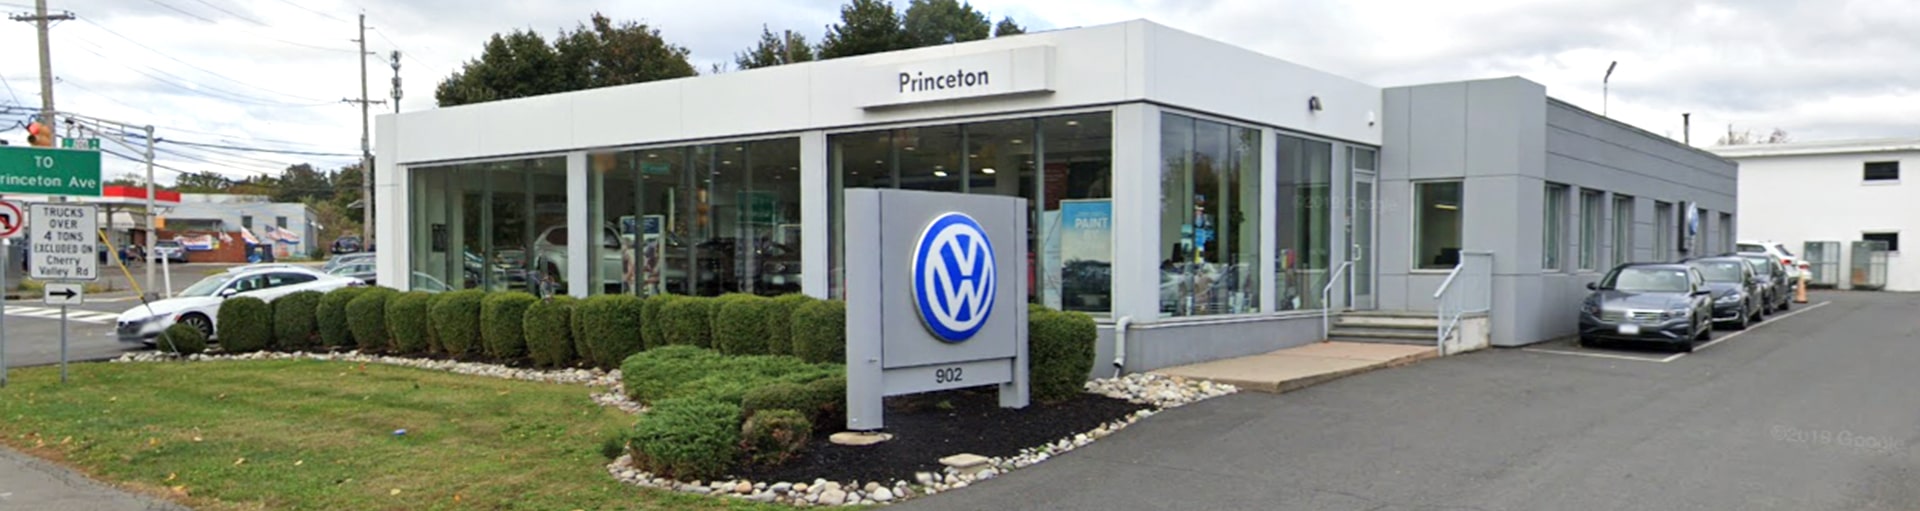 Volkswagen Princeton Synthetic Oil Change